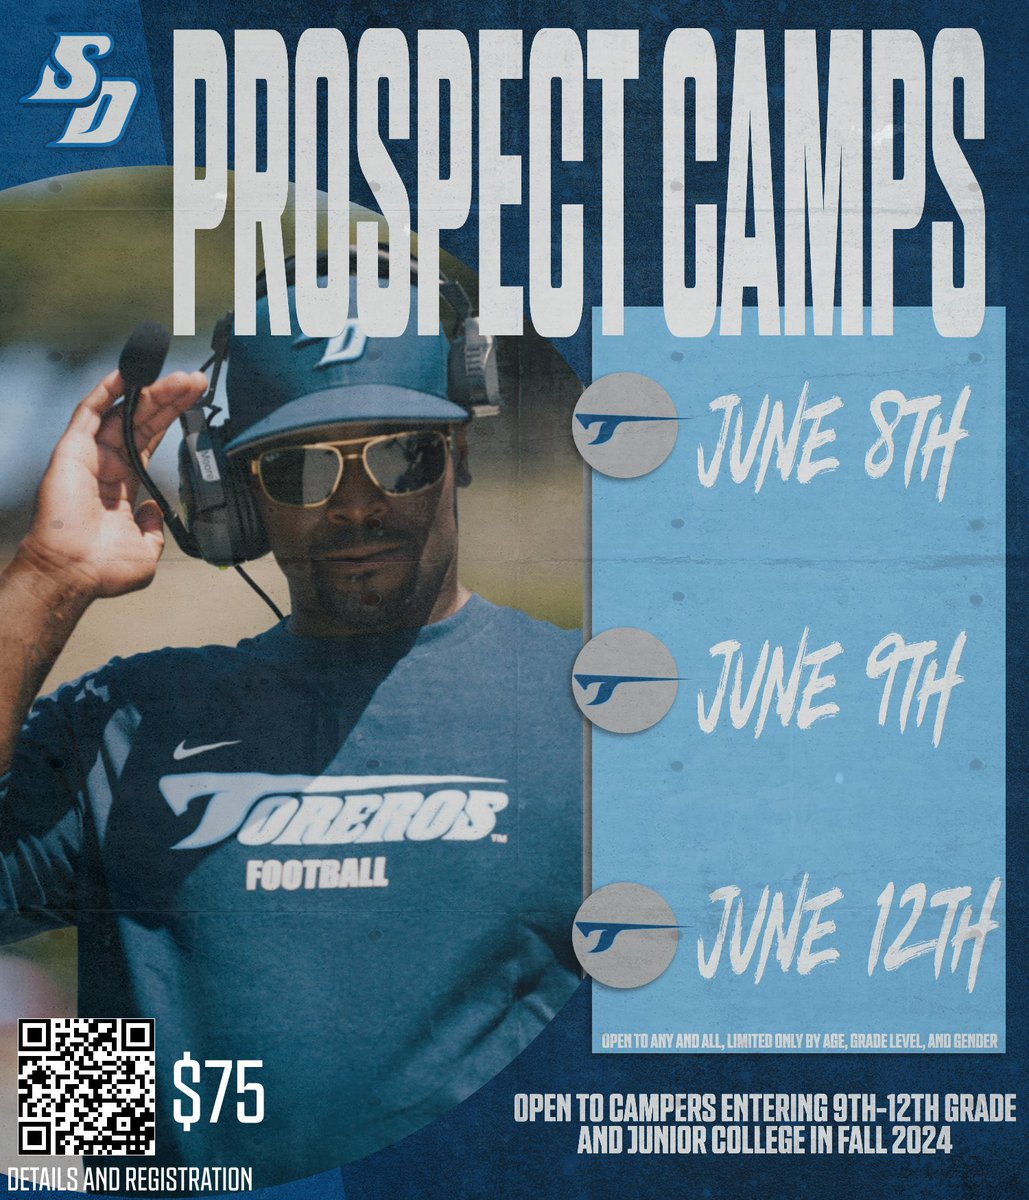 🚨Don’t forget about Prospect Camp this summer in sunny San Diego! 🚨 Come work with all our coaches and get evaluated! #GoToreros